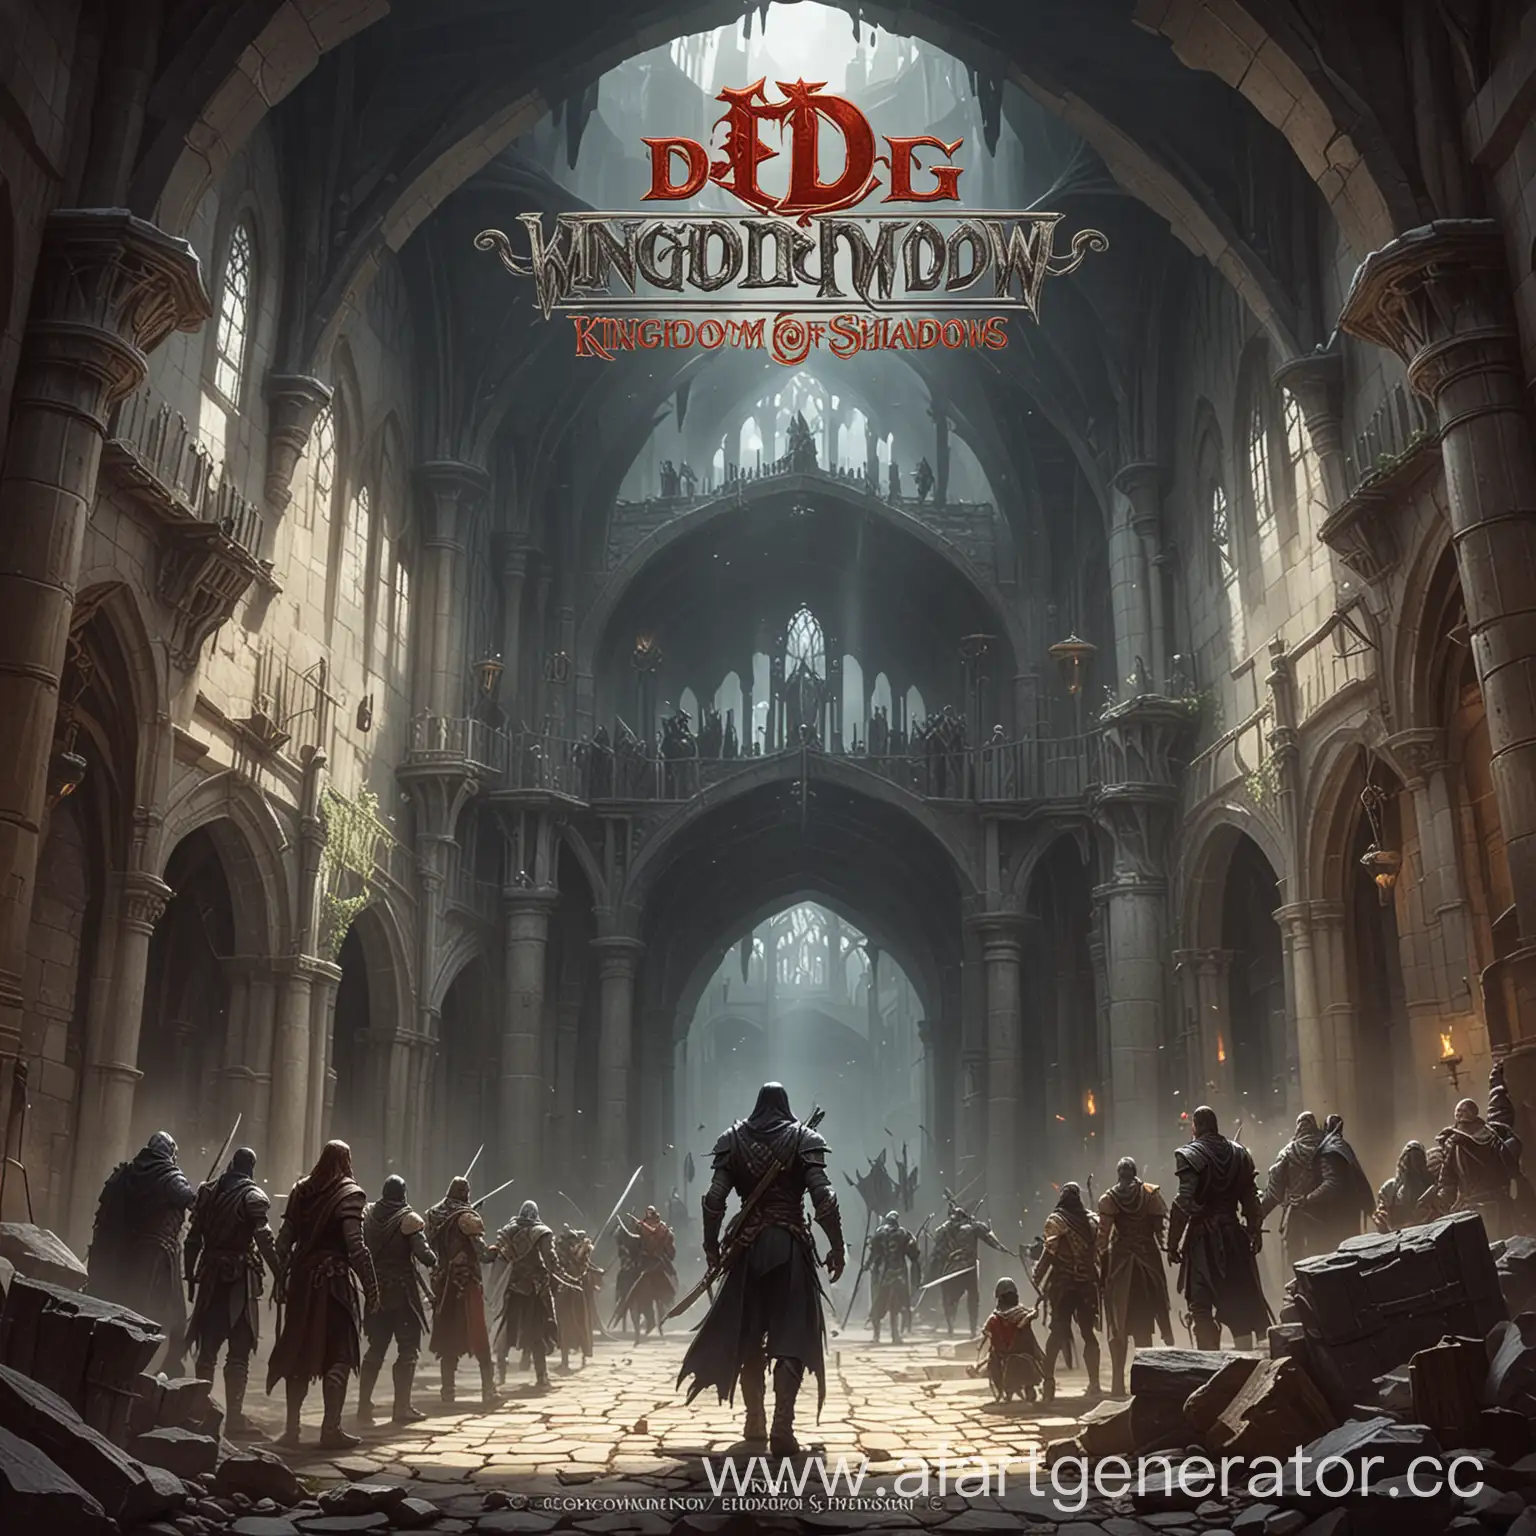 Fantasy-World-Kingdom-of-Shadows-Artwork-Featuring-Dungeons-and-Dragons-Theme